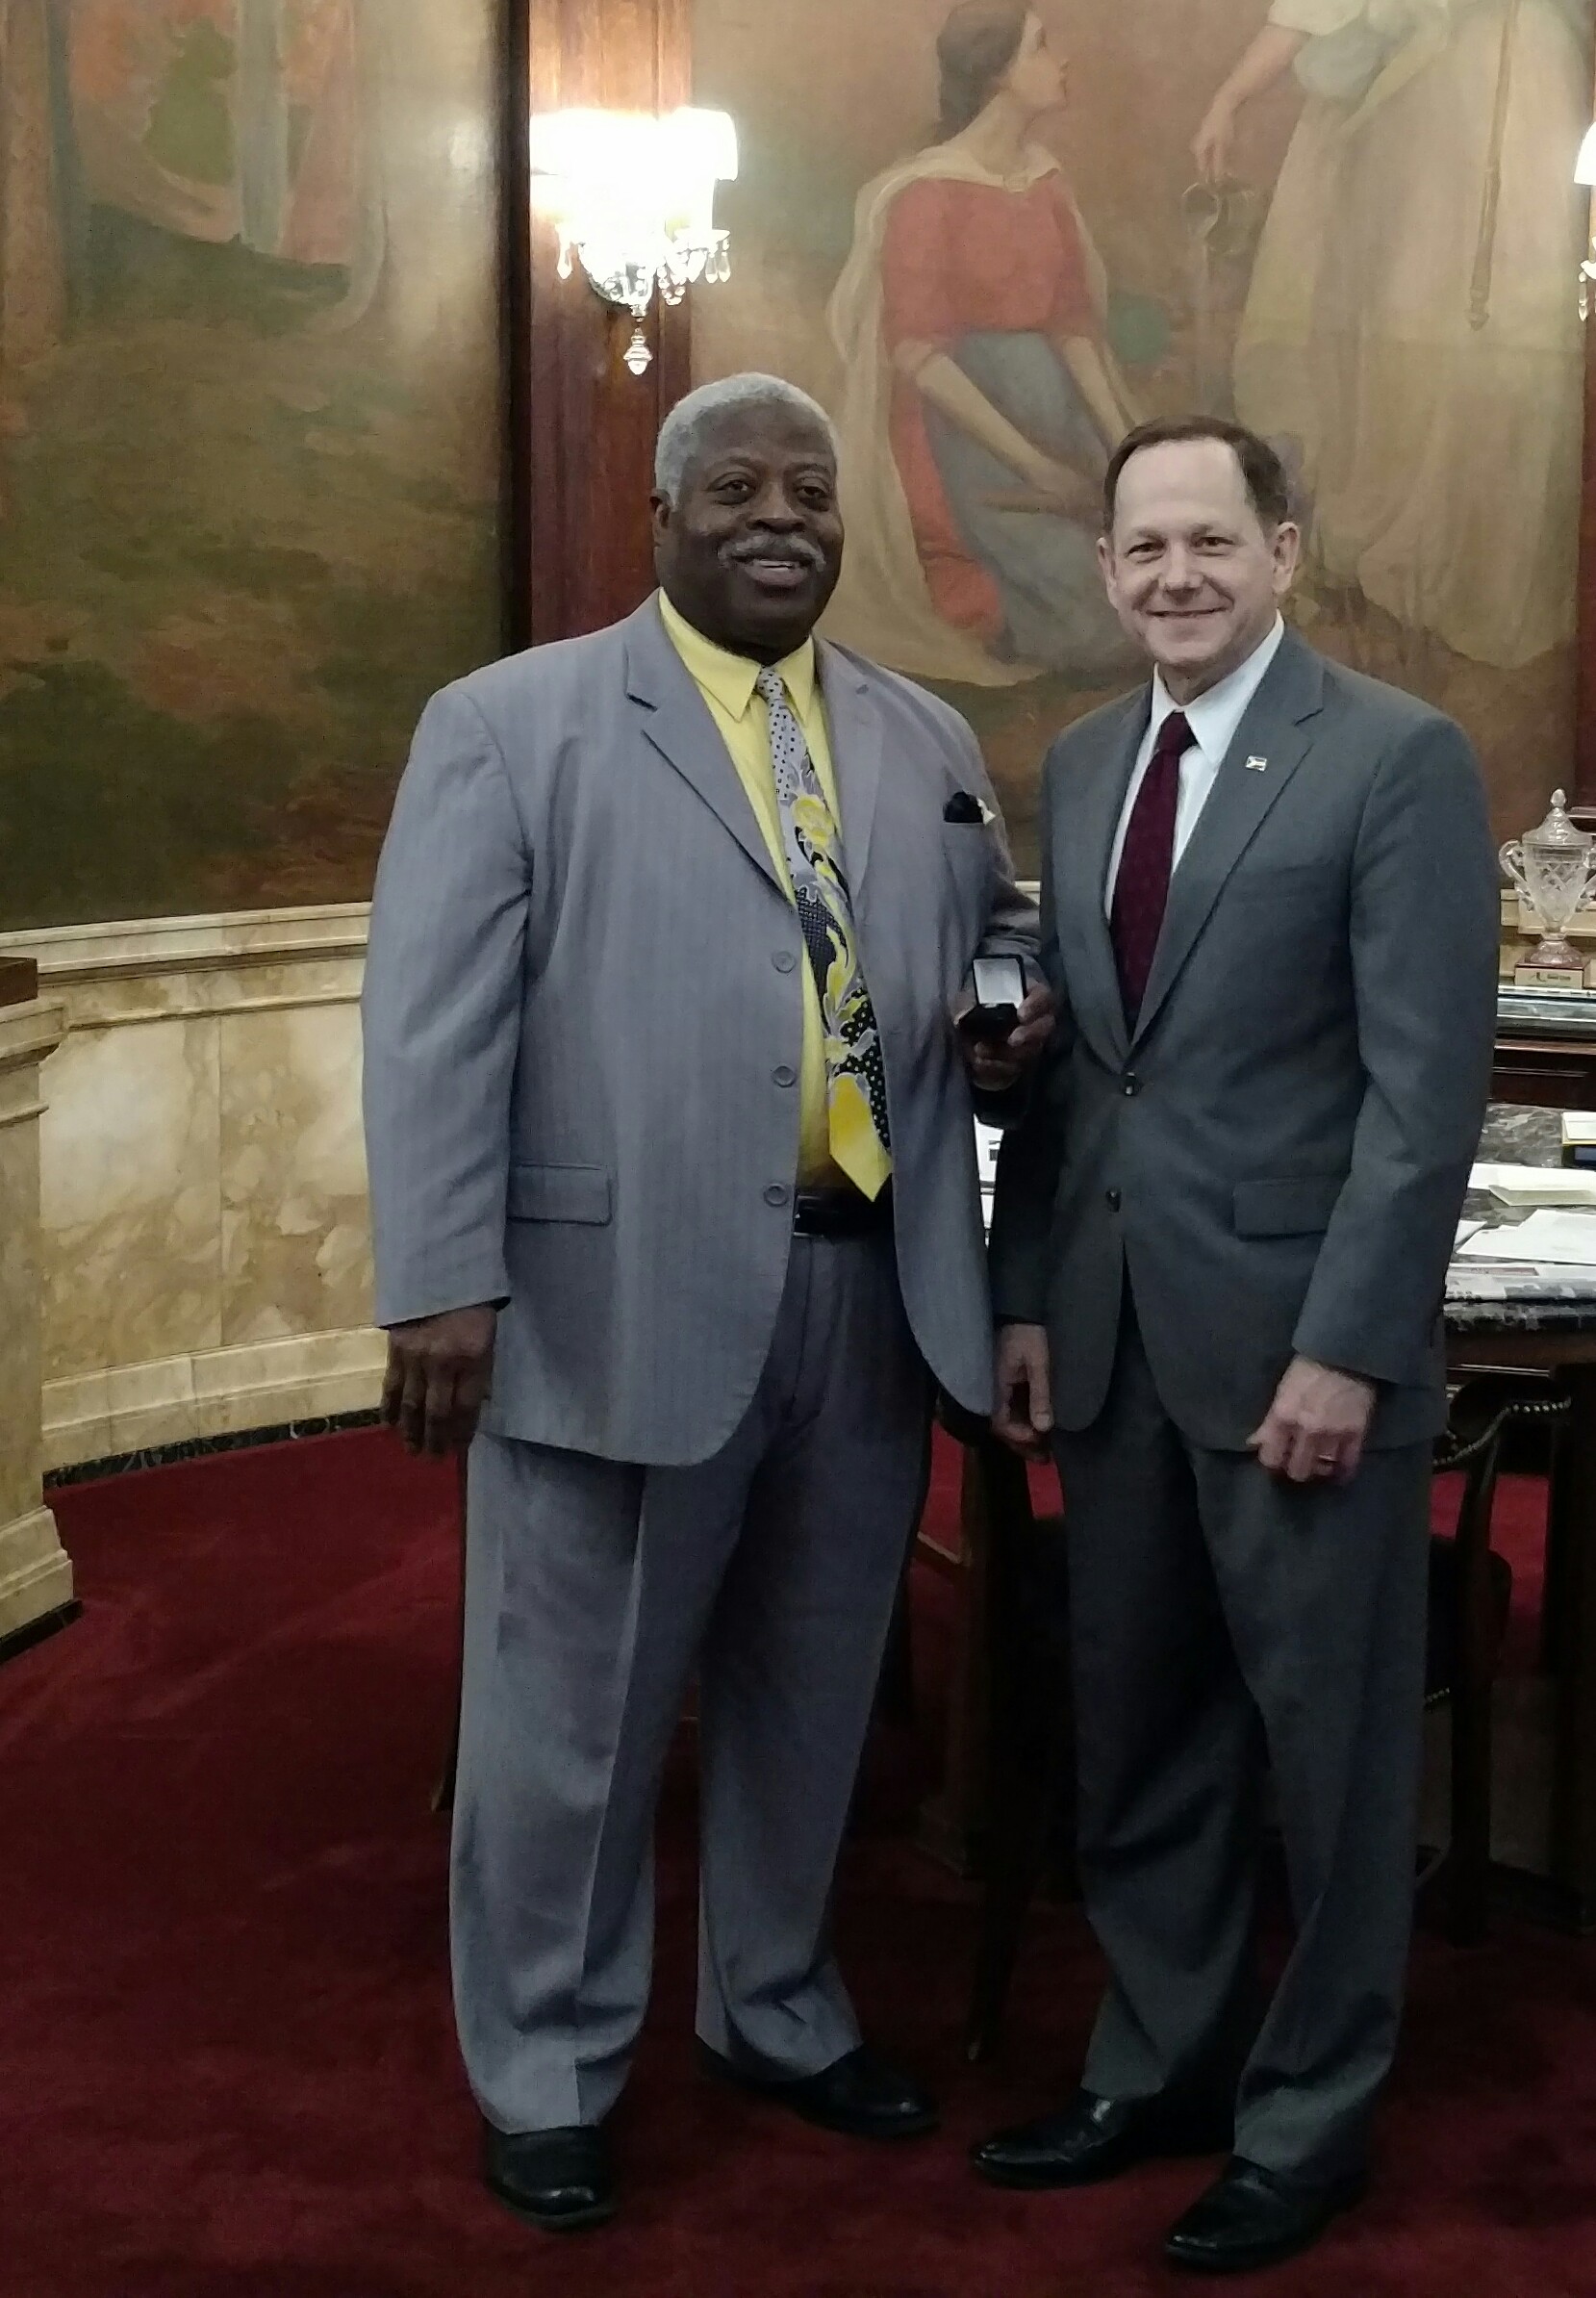 Robert Cotton receives his 40-year service pin from Mayor Francis Slay